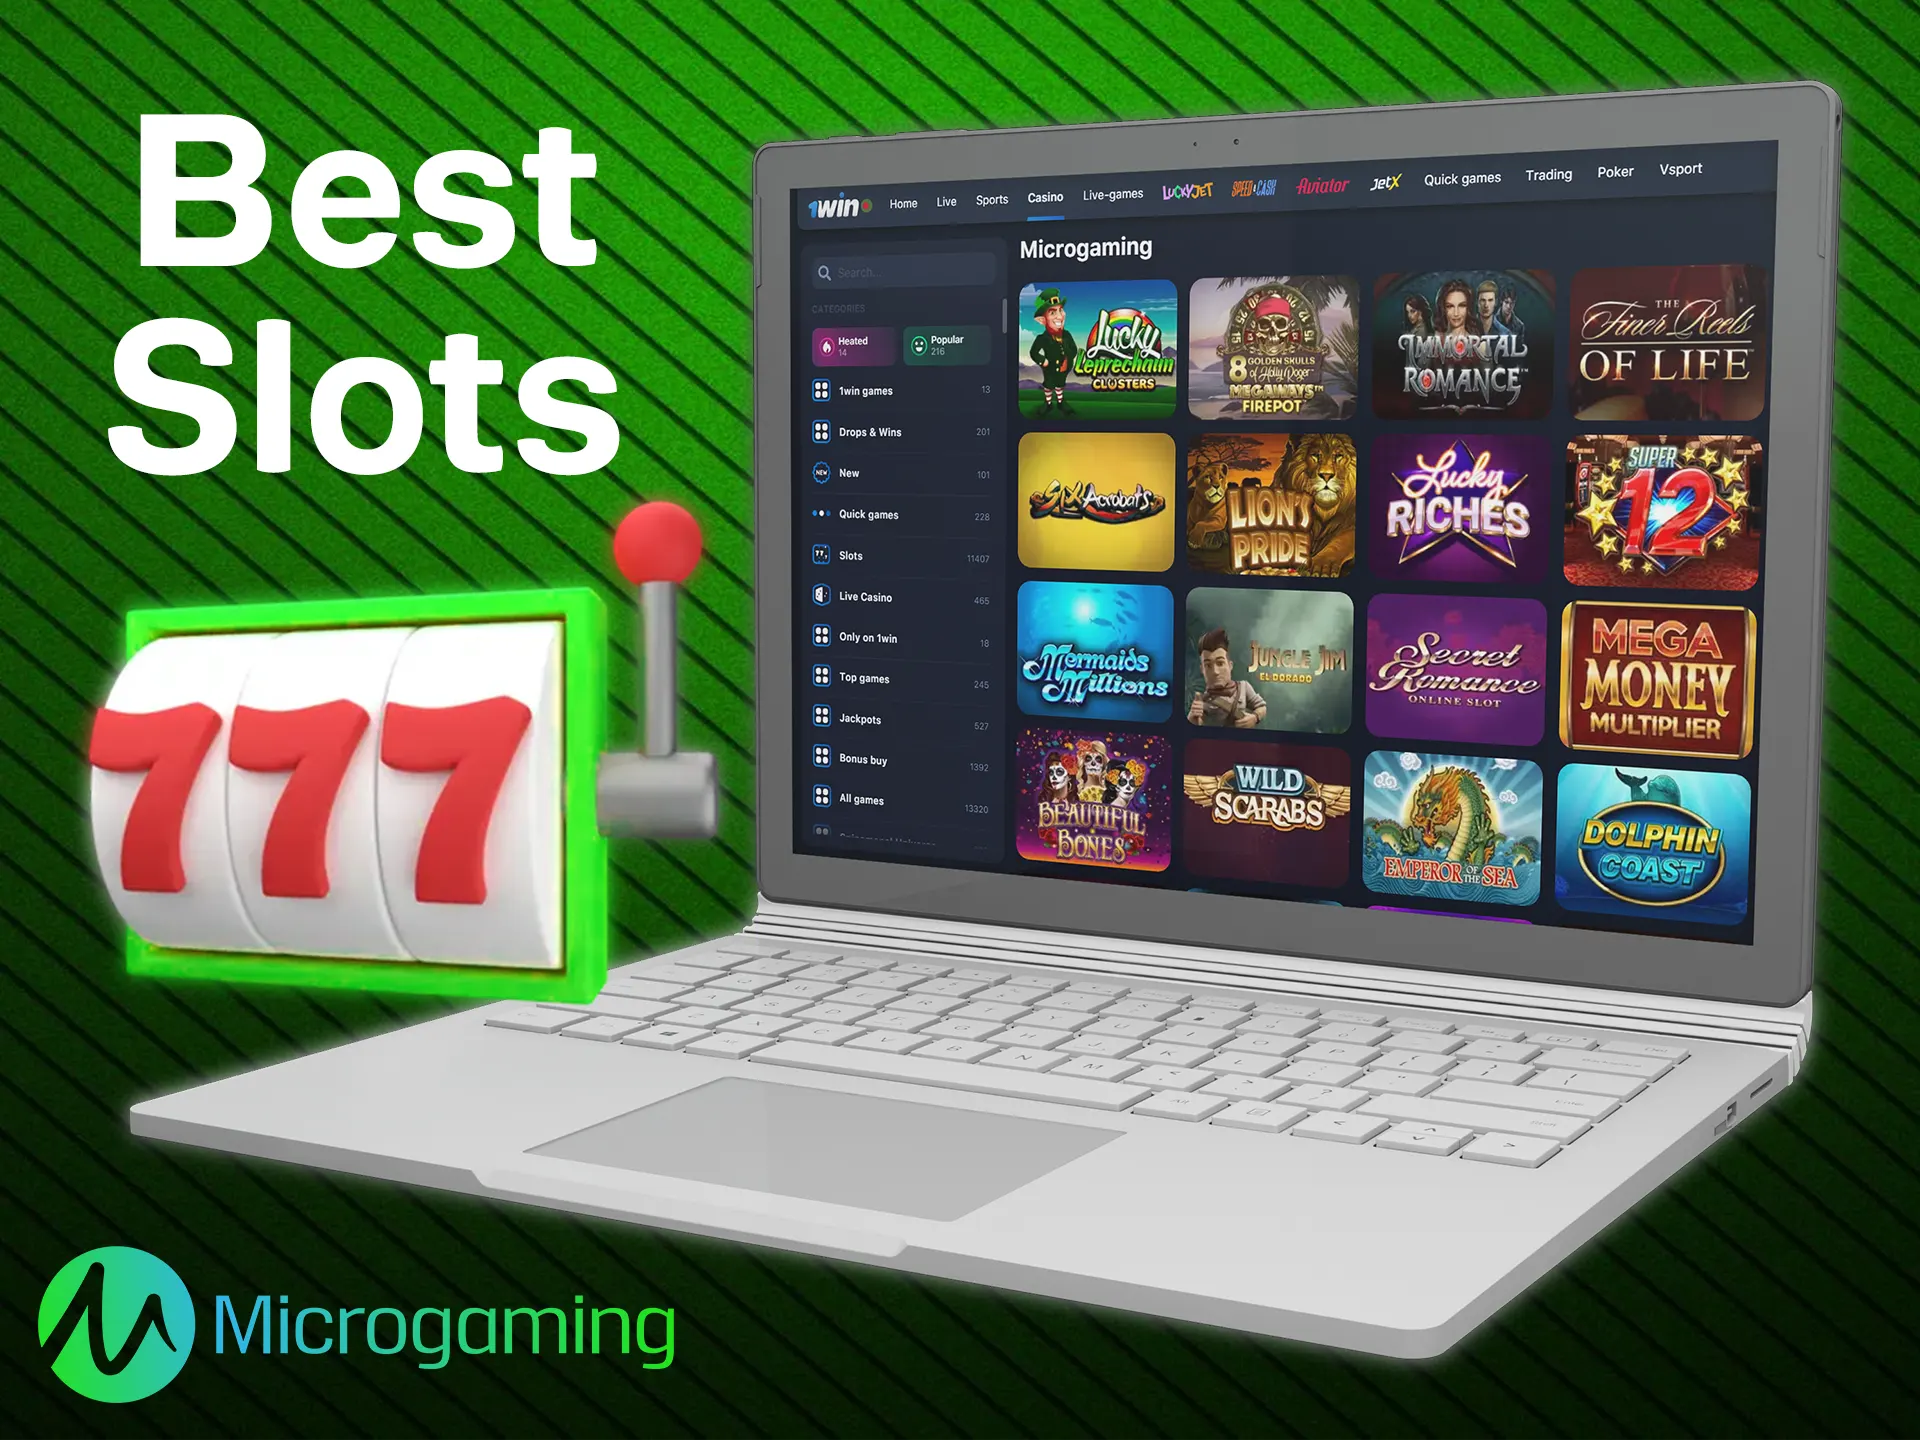 Search for your favorite Microgaming slots for play.